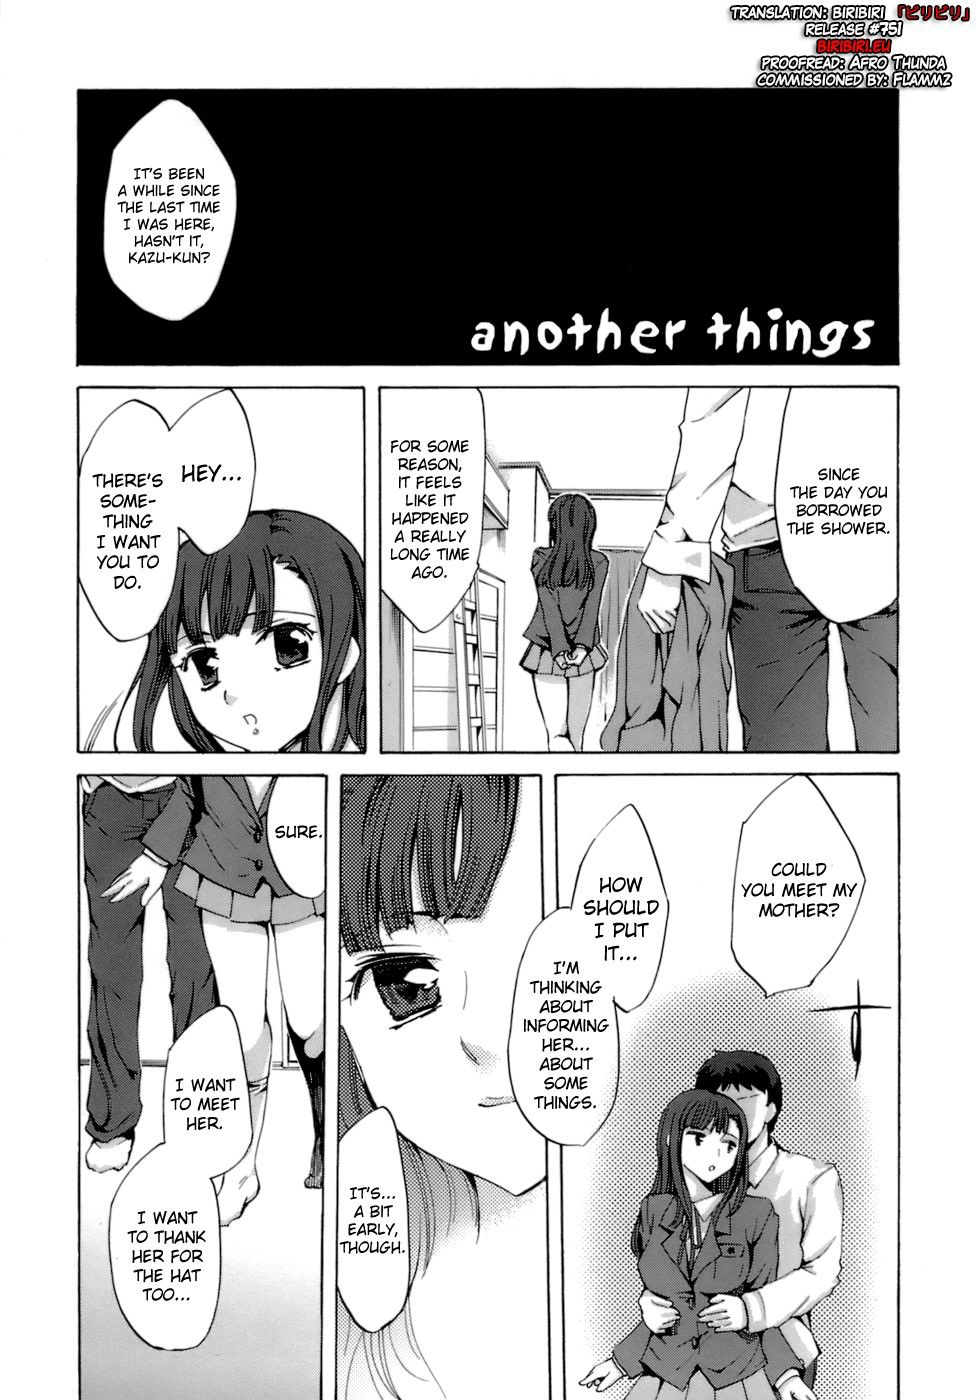 Hentai Manga Comic-Innocent Thing-Chapter 9-Another Things-1